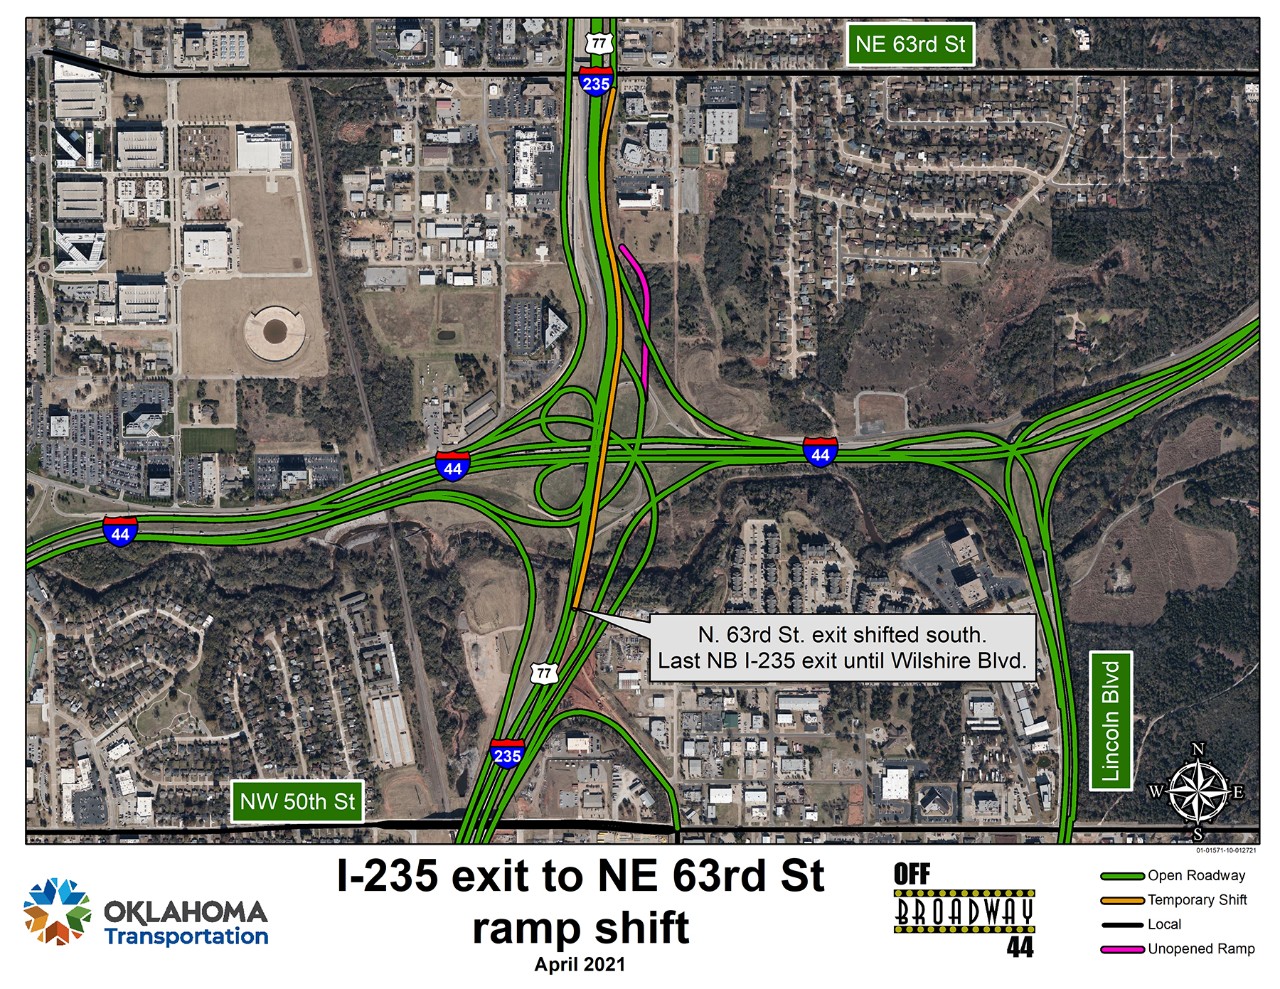 I-235 and N. 63rd St. exit temporary shift